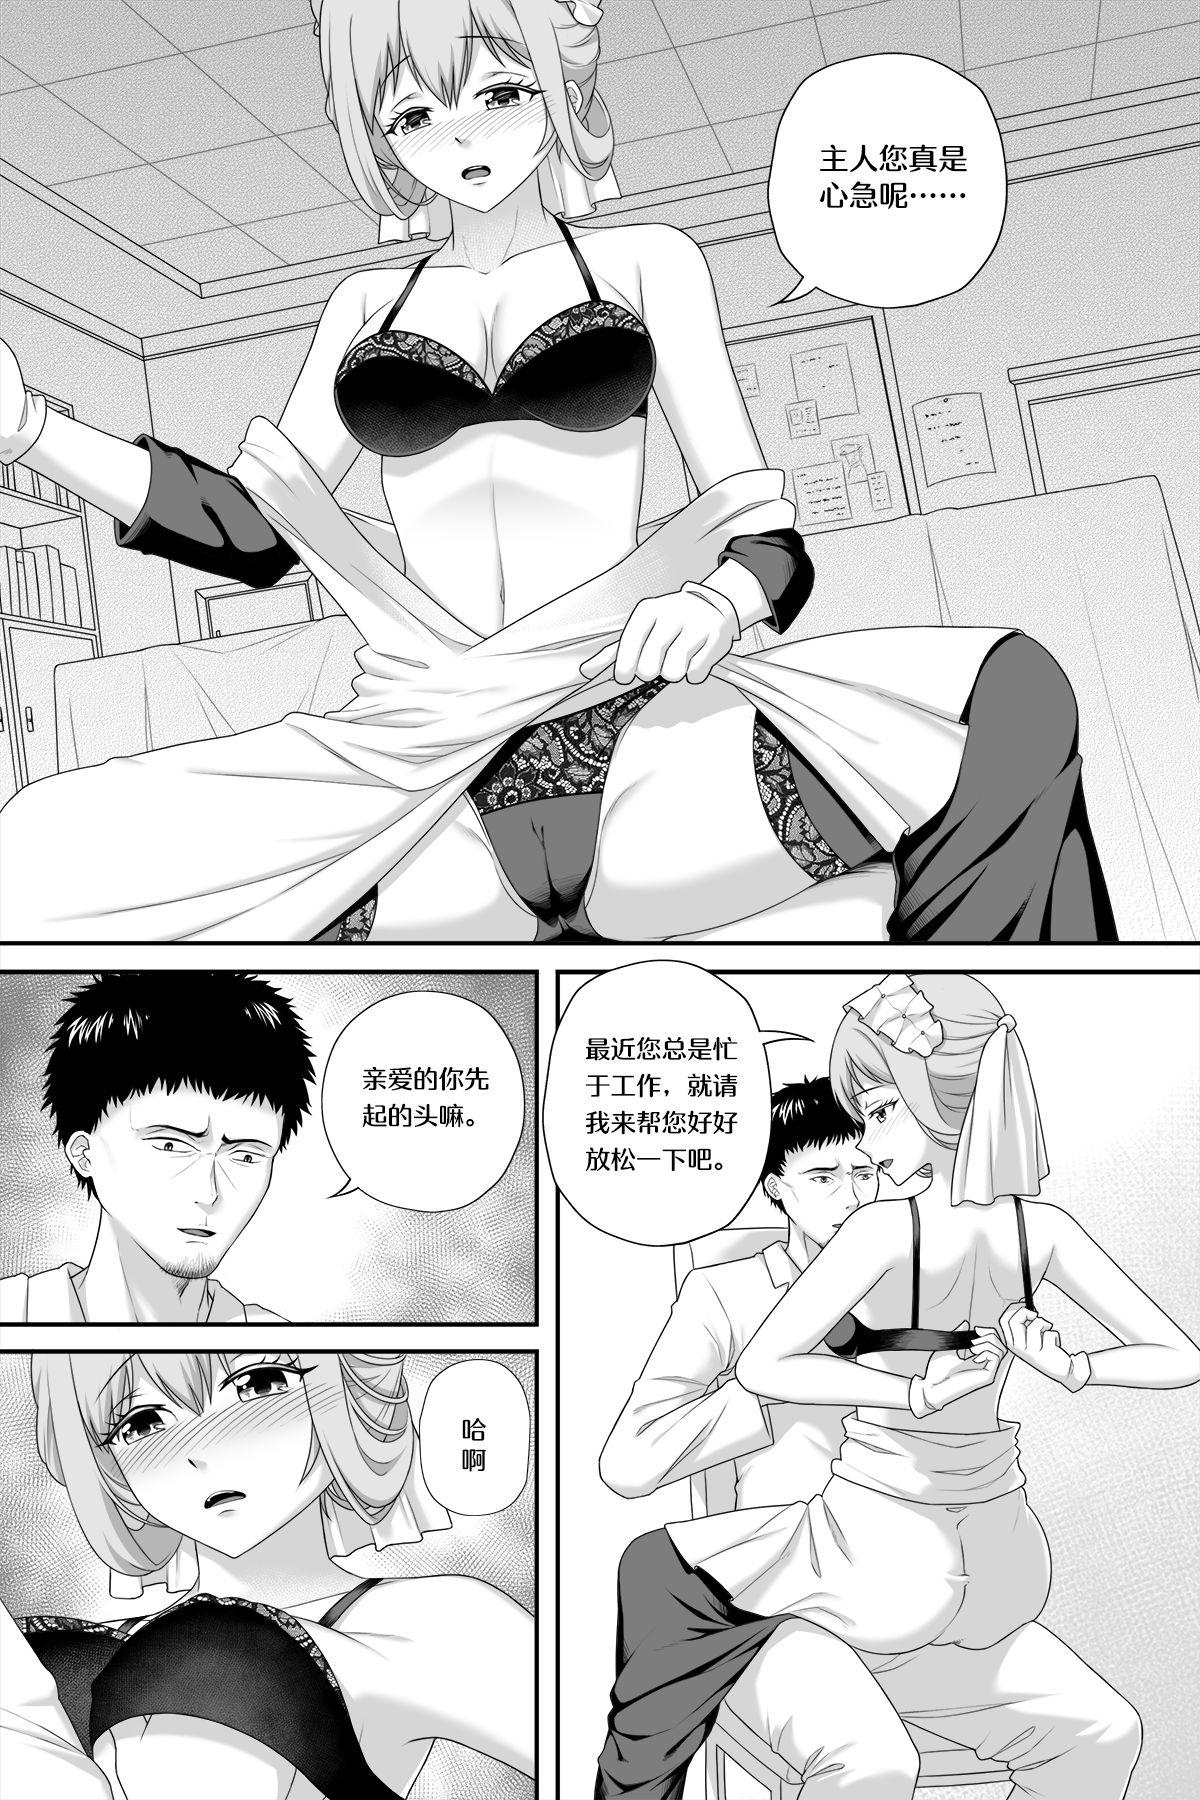 Roleplay 花女仆的侍奉 - Warship girls Pissing - Page 4